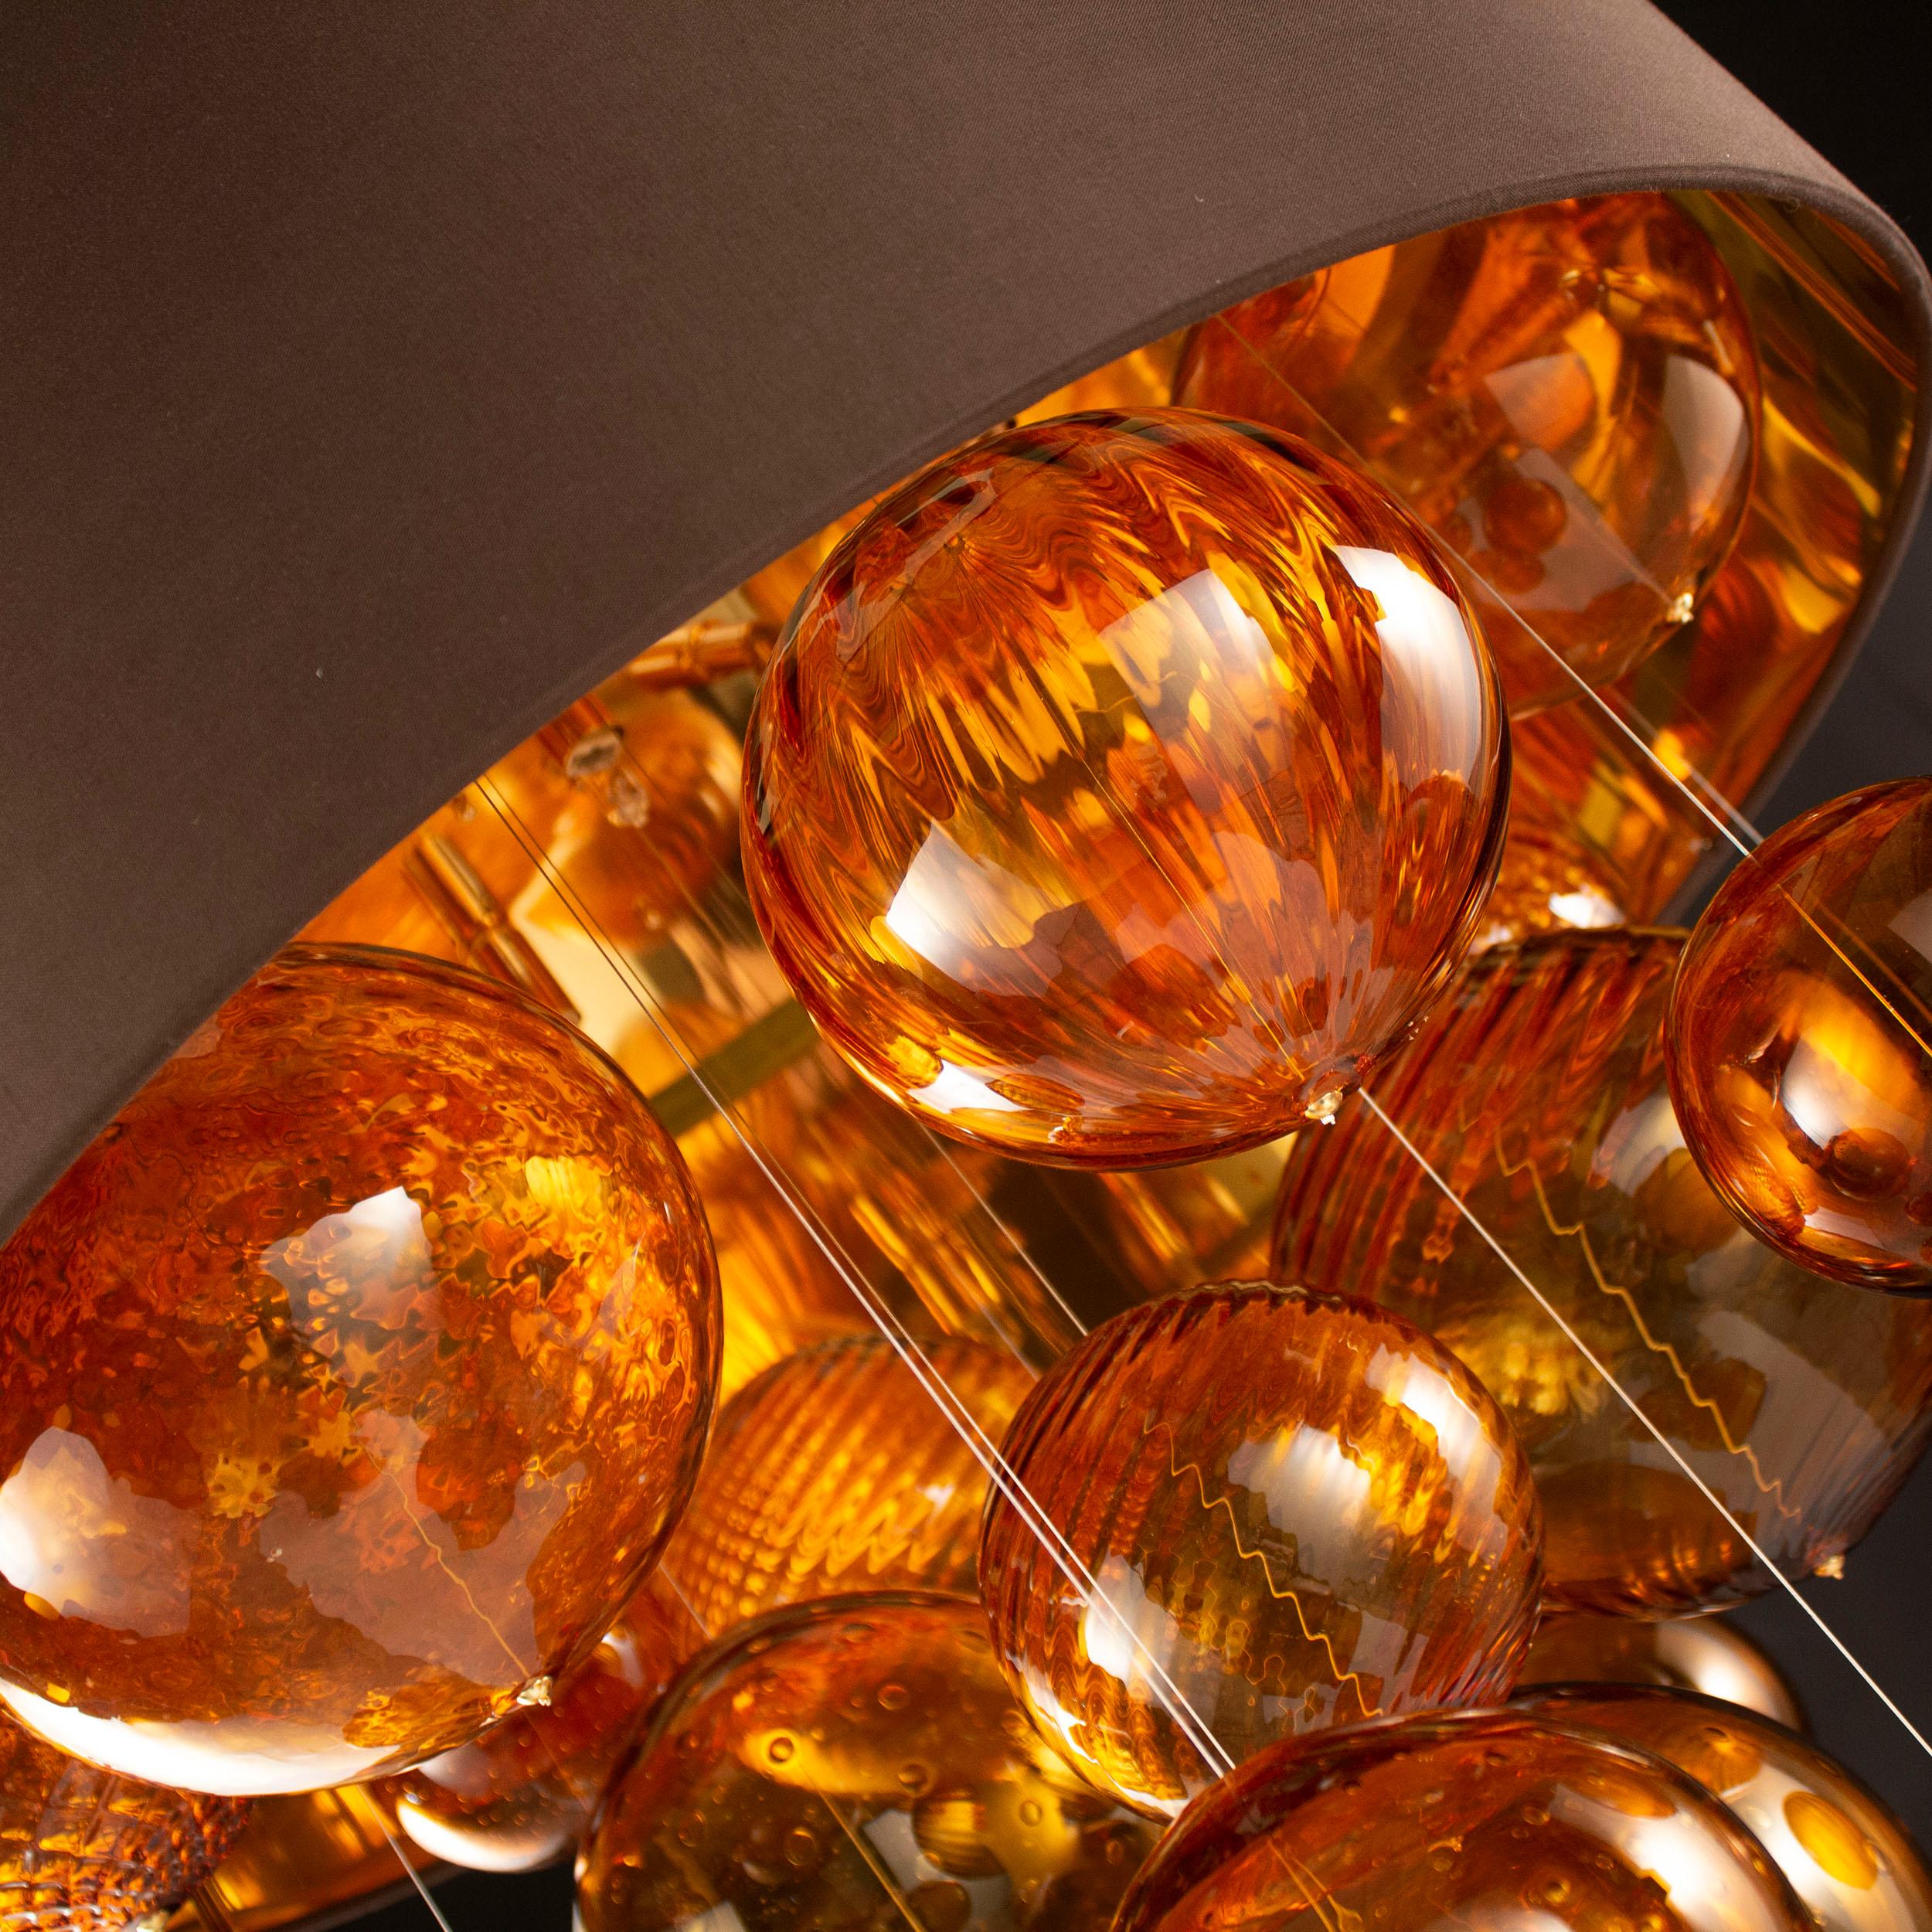 Absolute suspension lamp with brown cotonette lampshade and amber artistic glass elements by Multiforme. Polished gold frame. The artistic glass, design chandelier. It consists in a suspension lampshade inside which the light bulbs are hidden and a